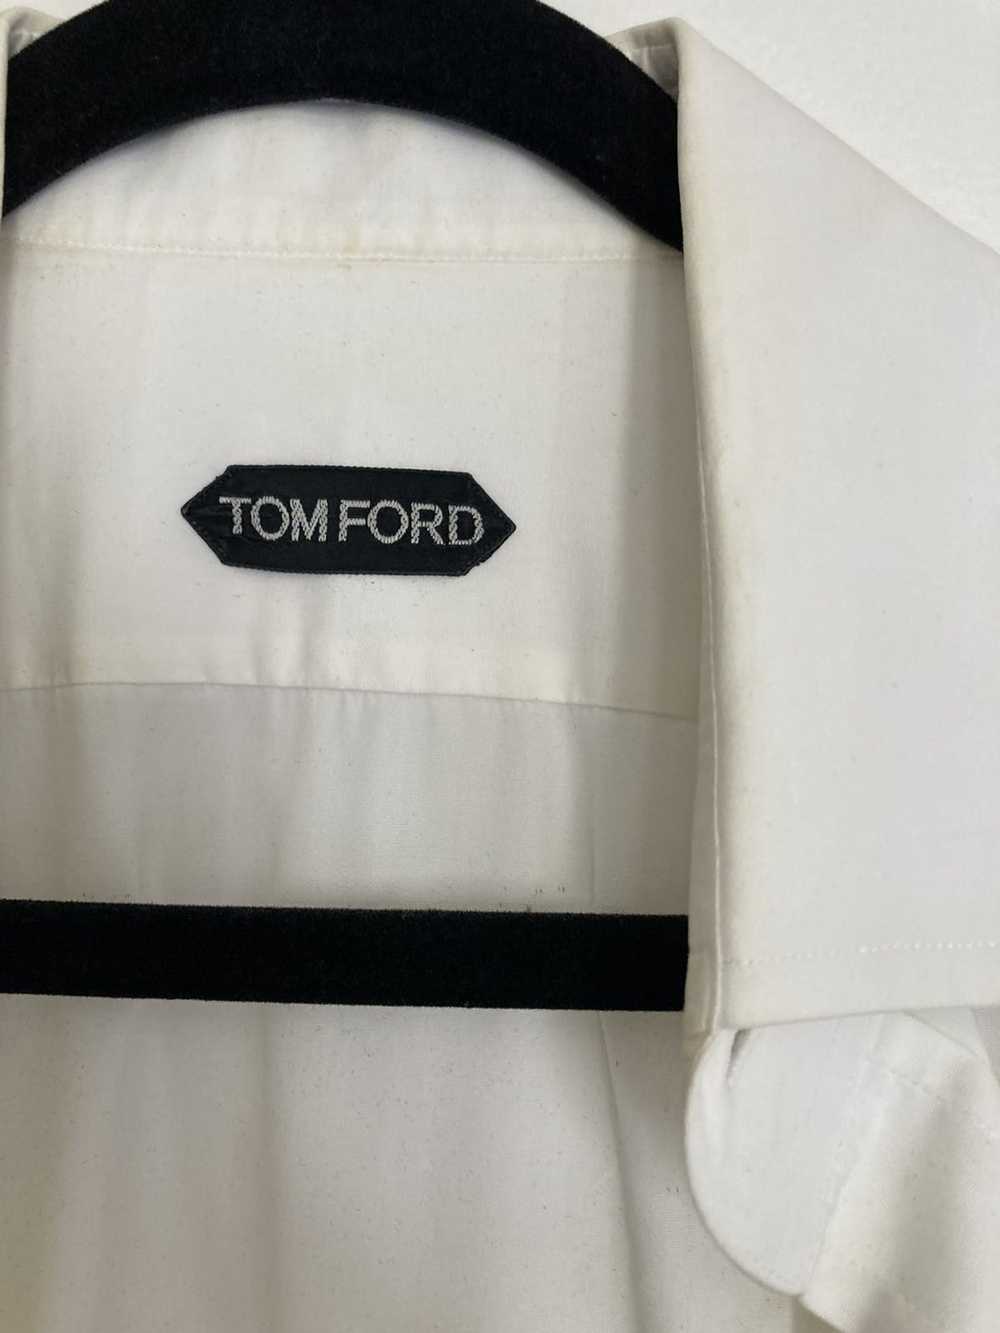 Tom Ford French Cuff Button Down Tom Ford Shirt - image 2